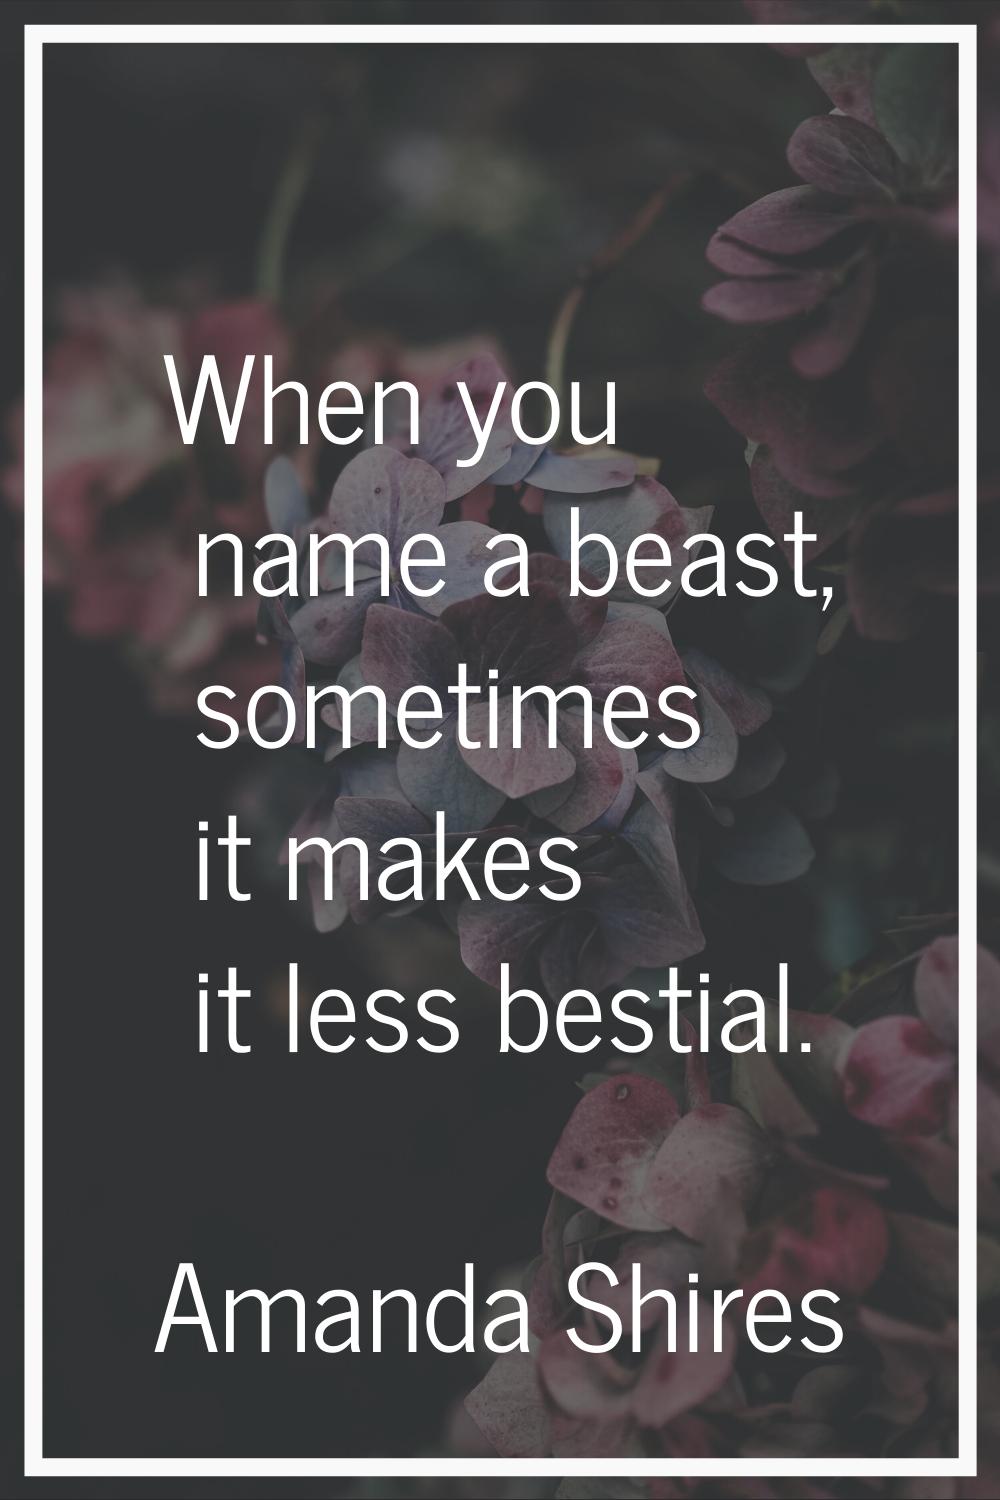 When you name a beast, sometimes it makes it less bestial.